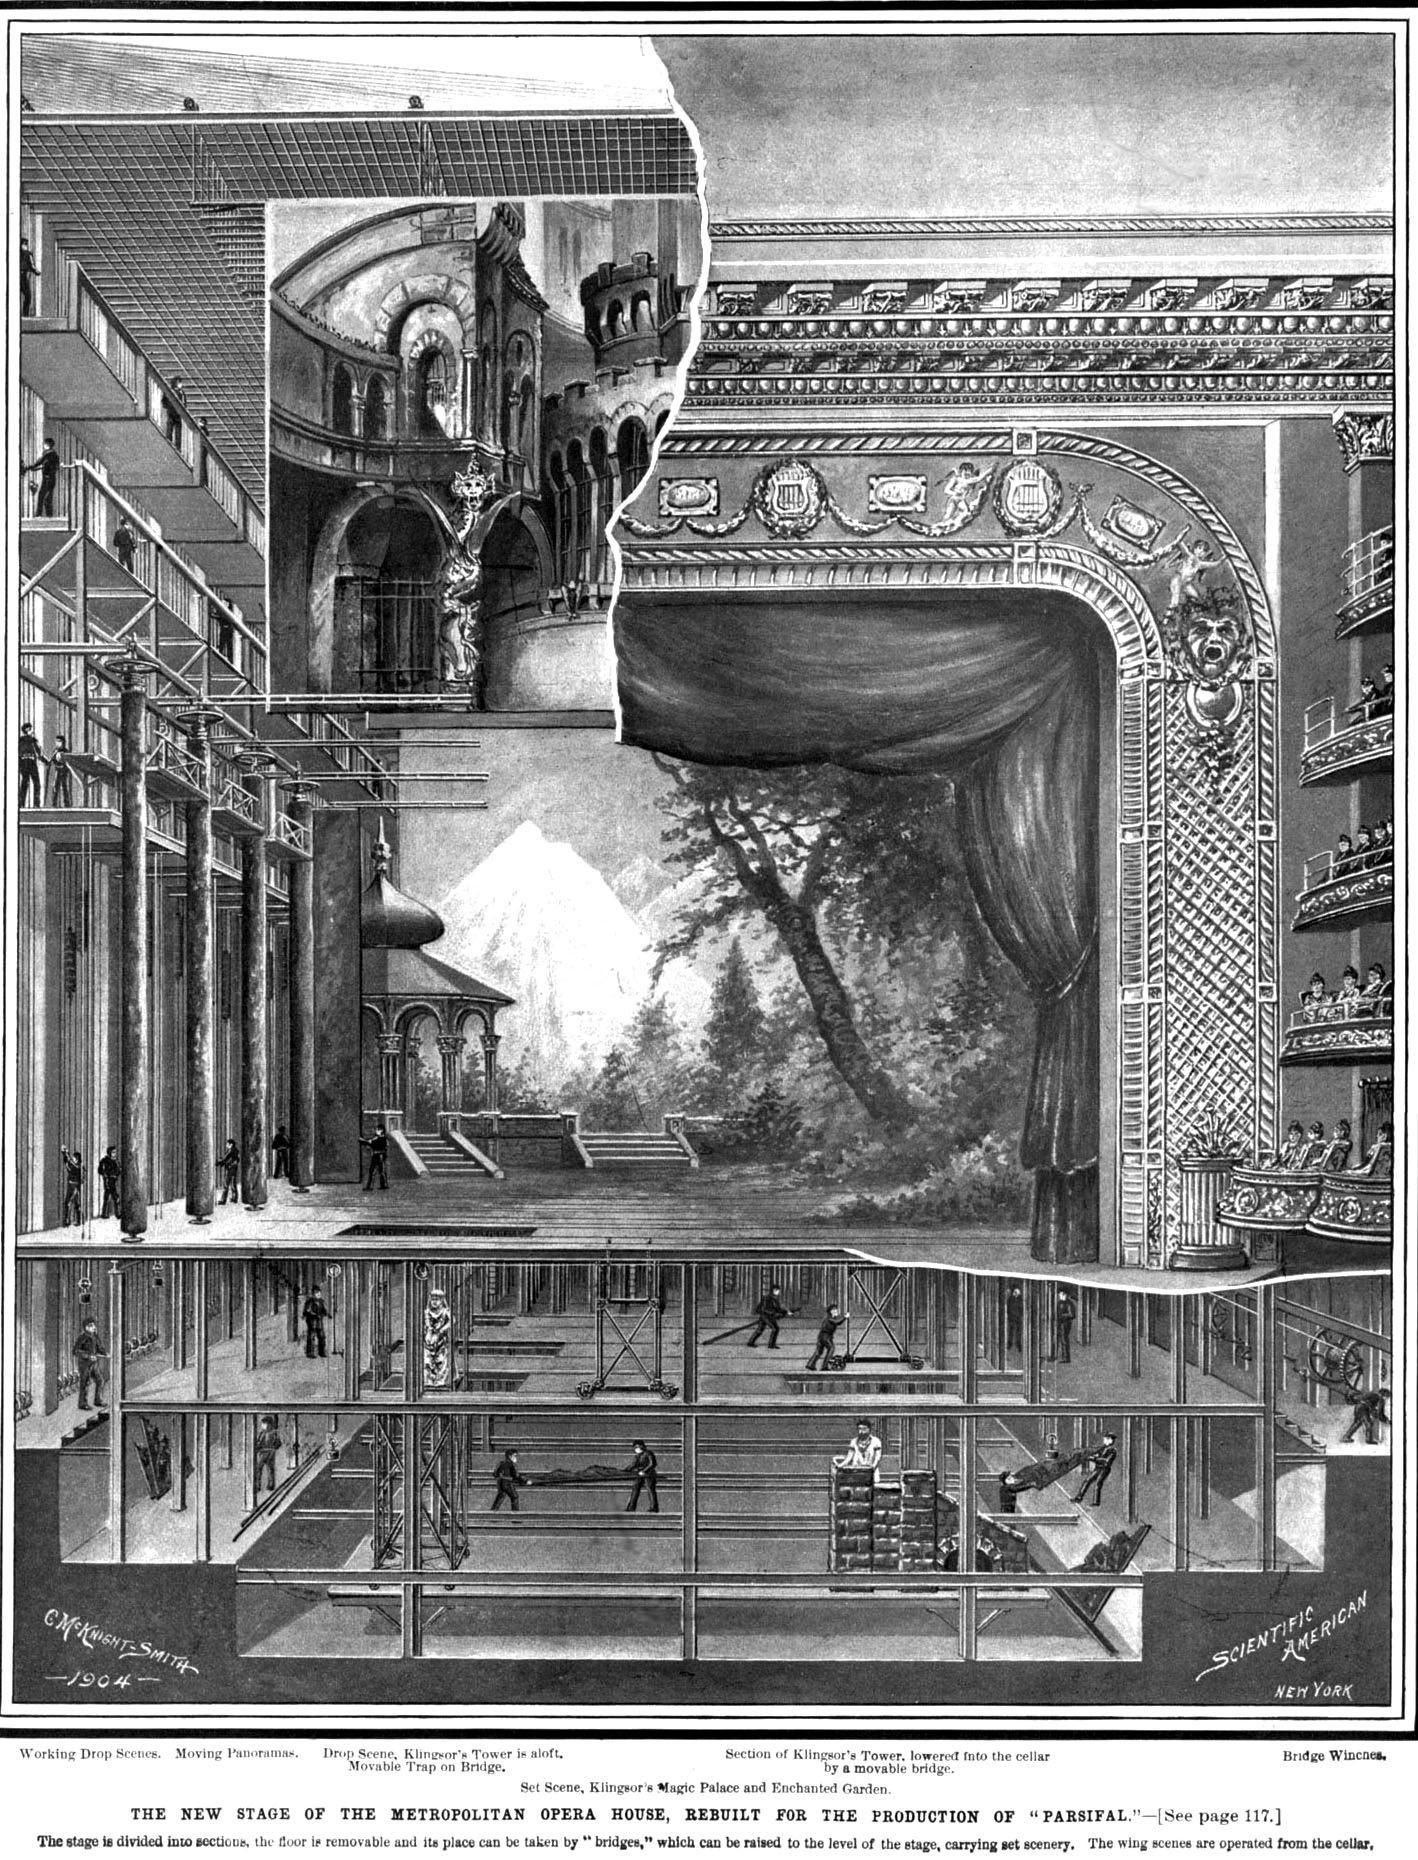 « The new stage of the Metropolitan Opera House rebuilt for the production of Parsifal », Une du magazine Scientific American, 6 février 1904